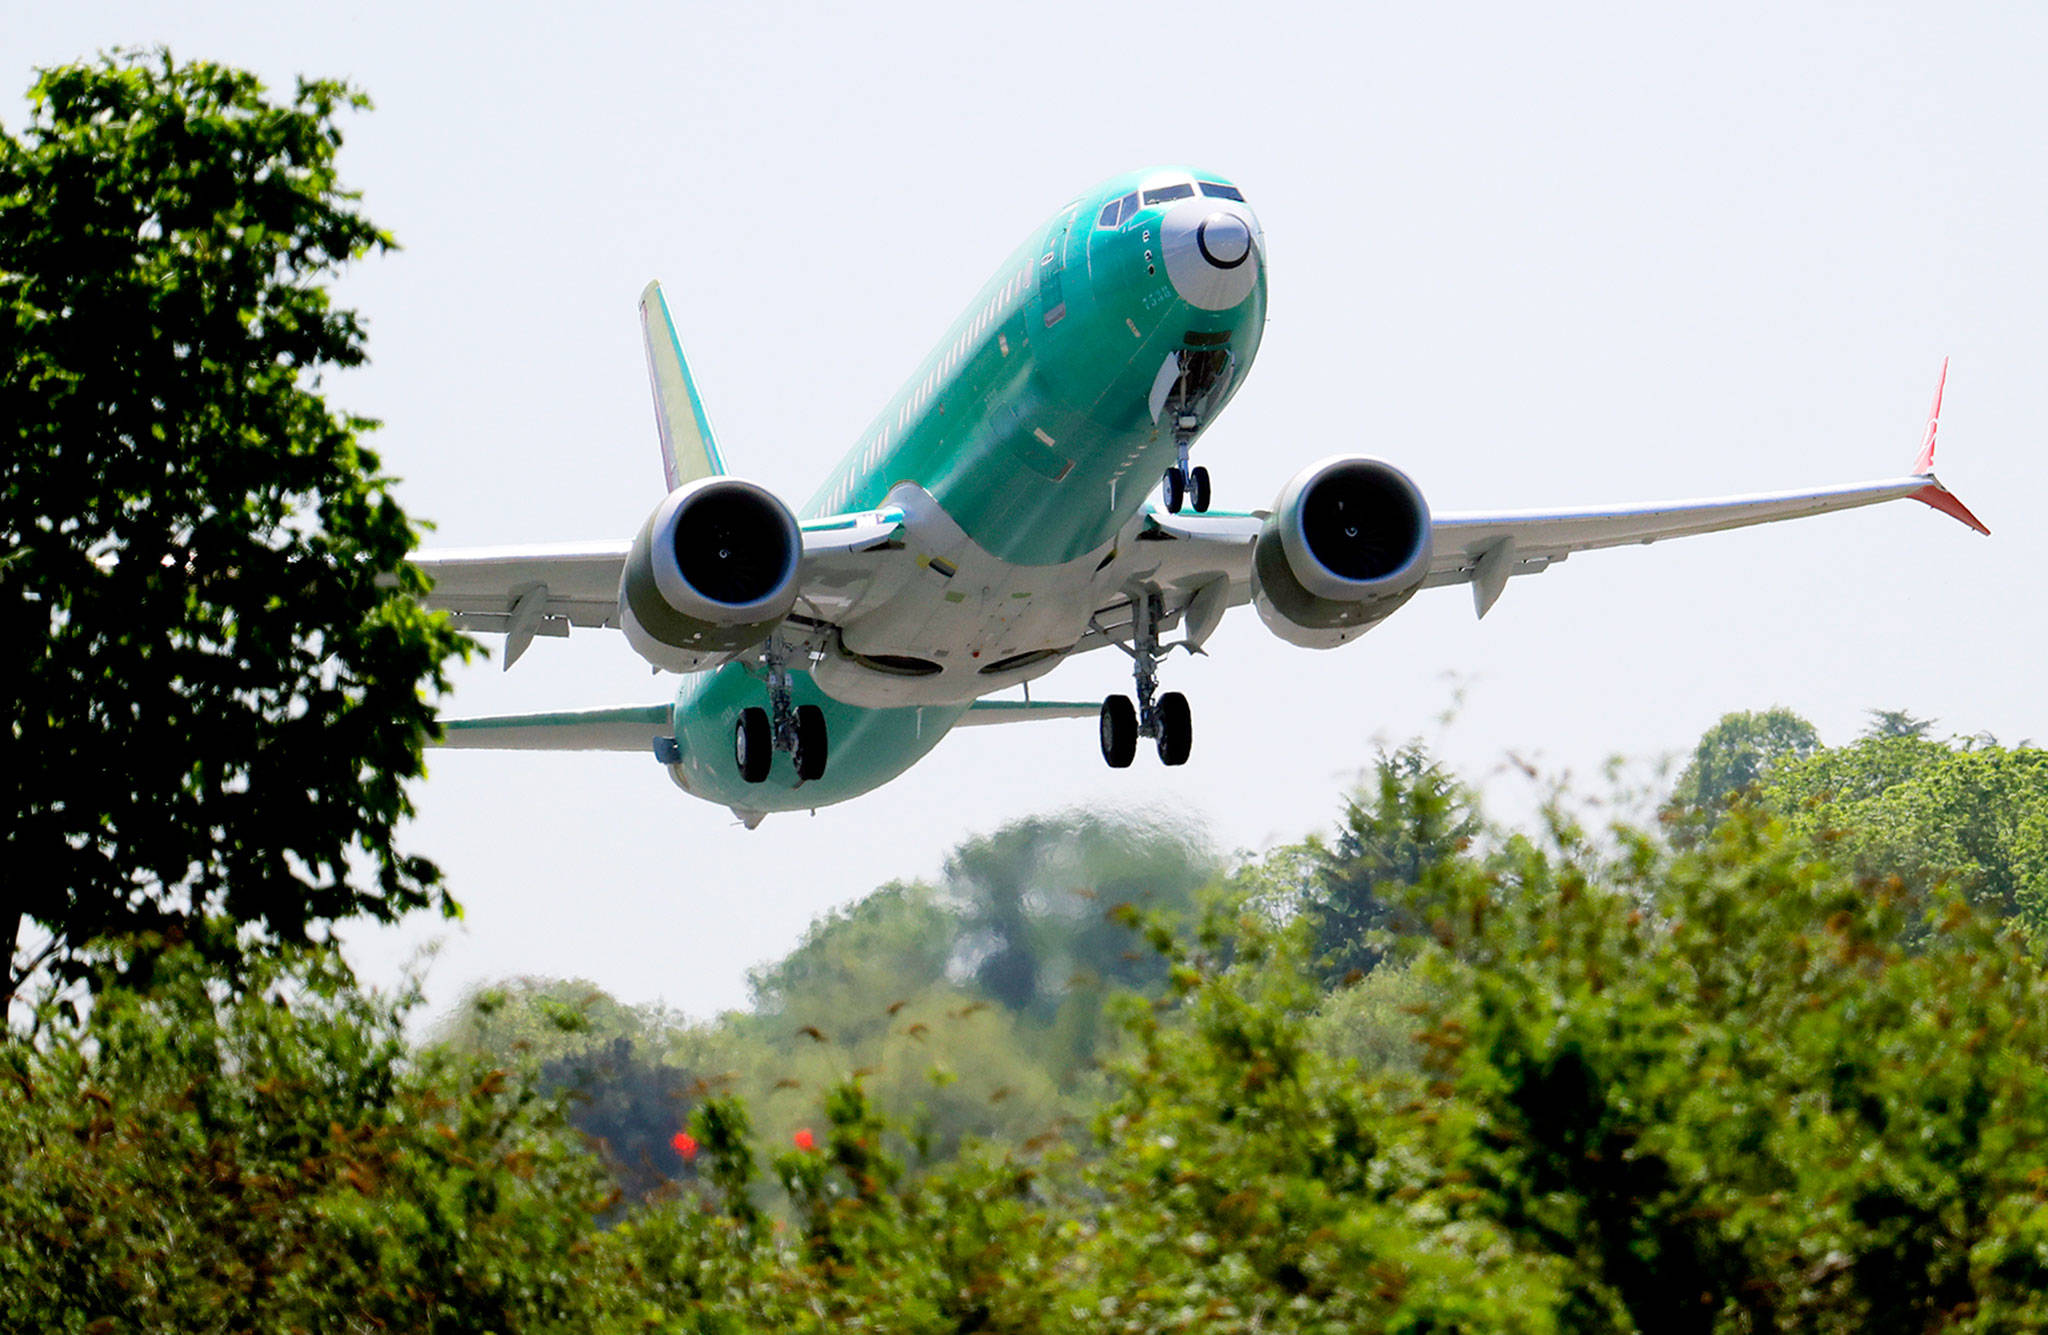 In this May 8 photo, a Boeing 737 Max 8 jetliner takes off on a test flight in Renton. (AP Photo/Ted S. Warren, File)